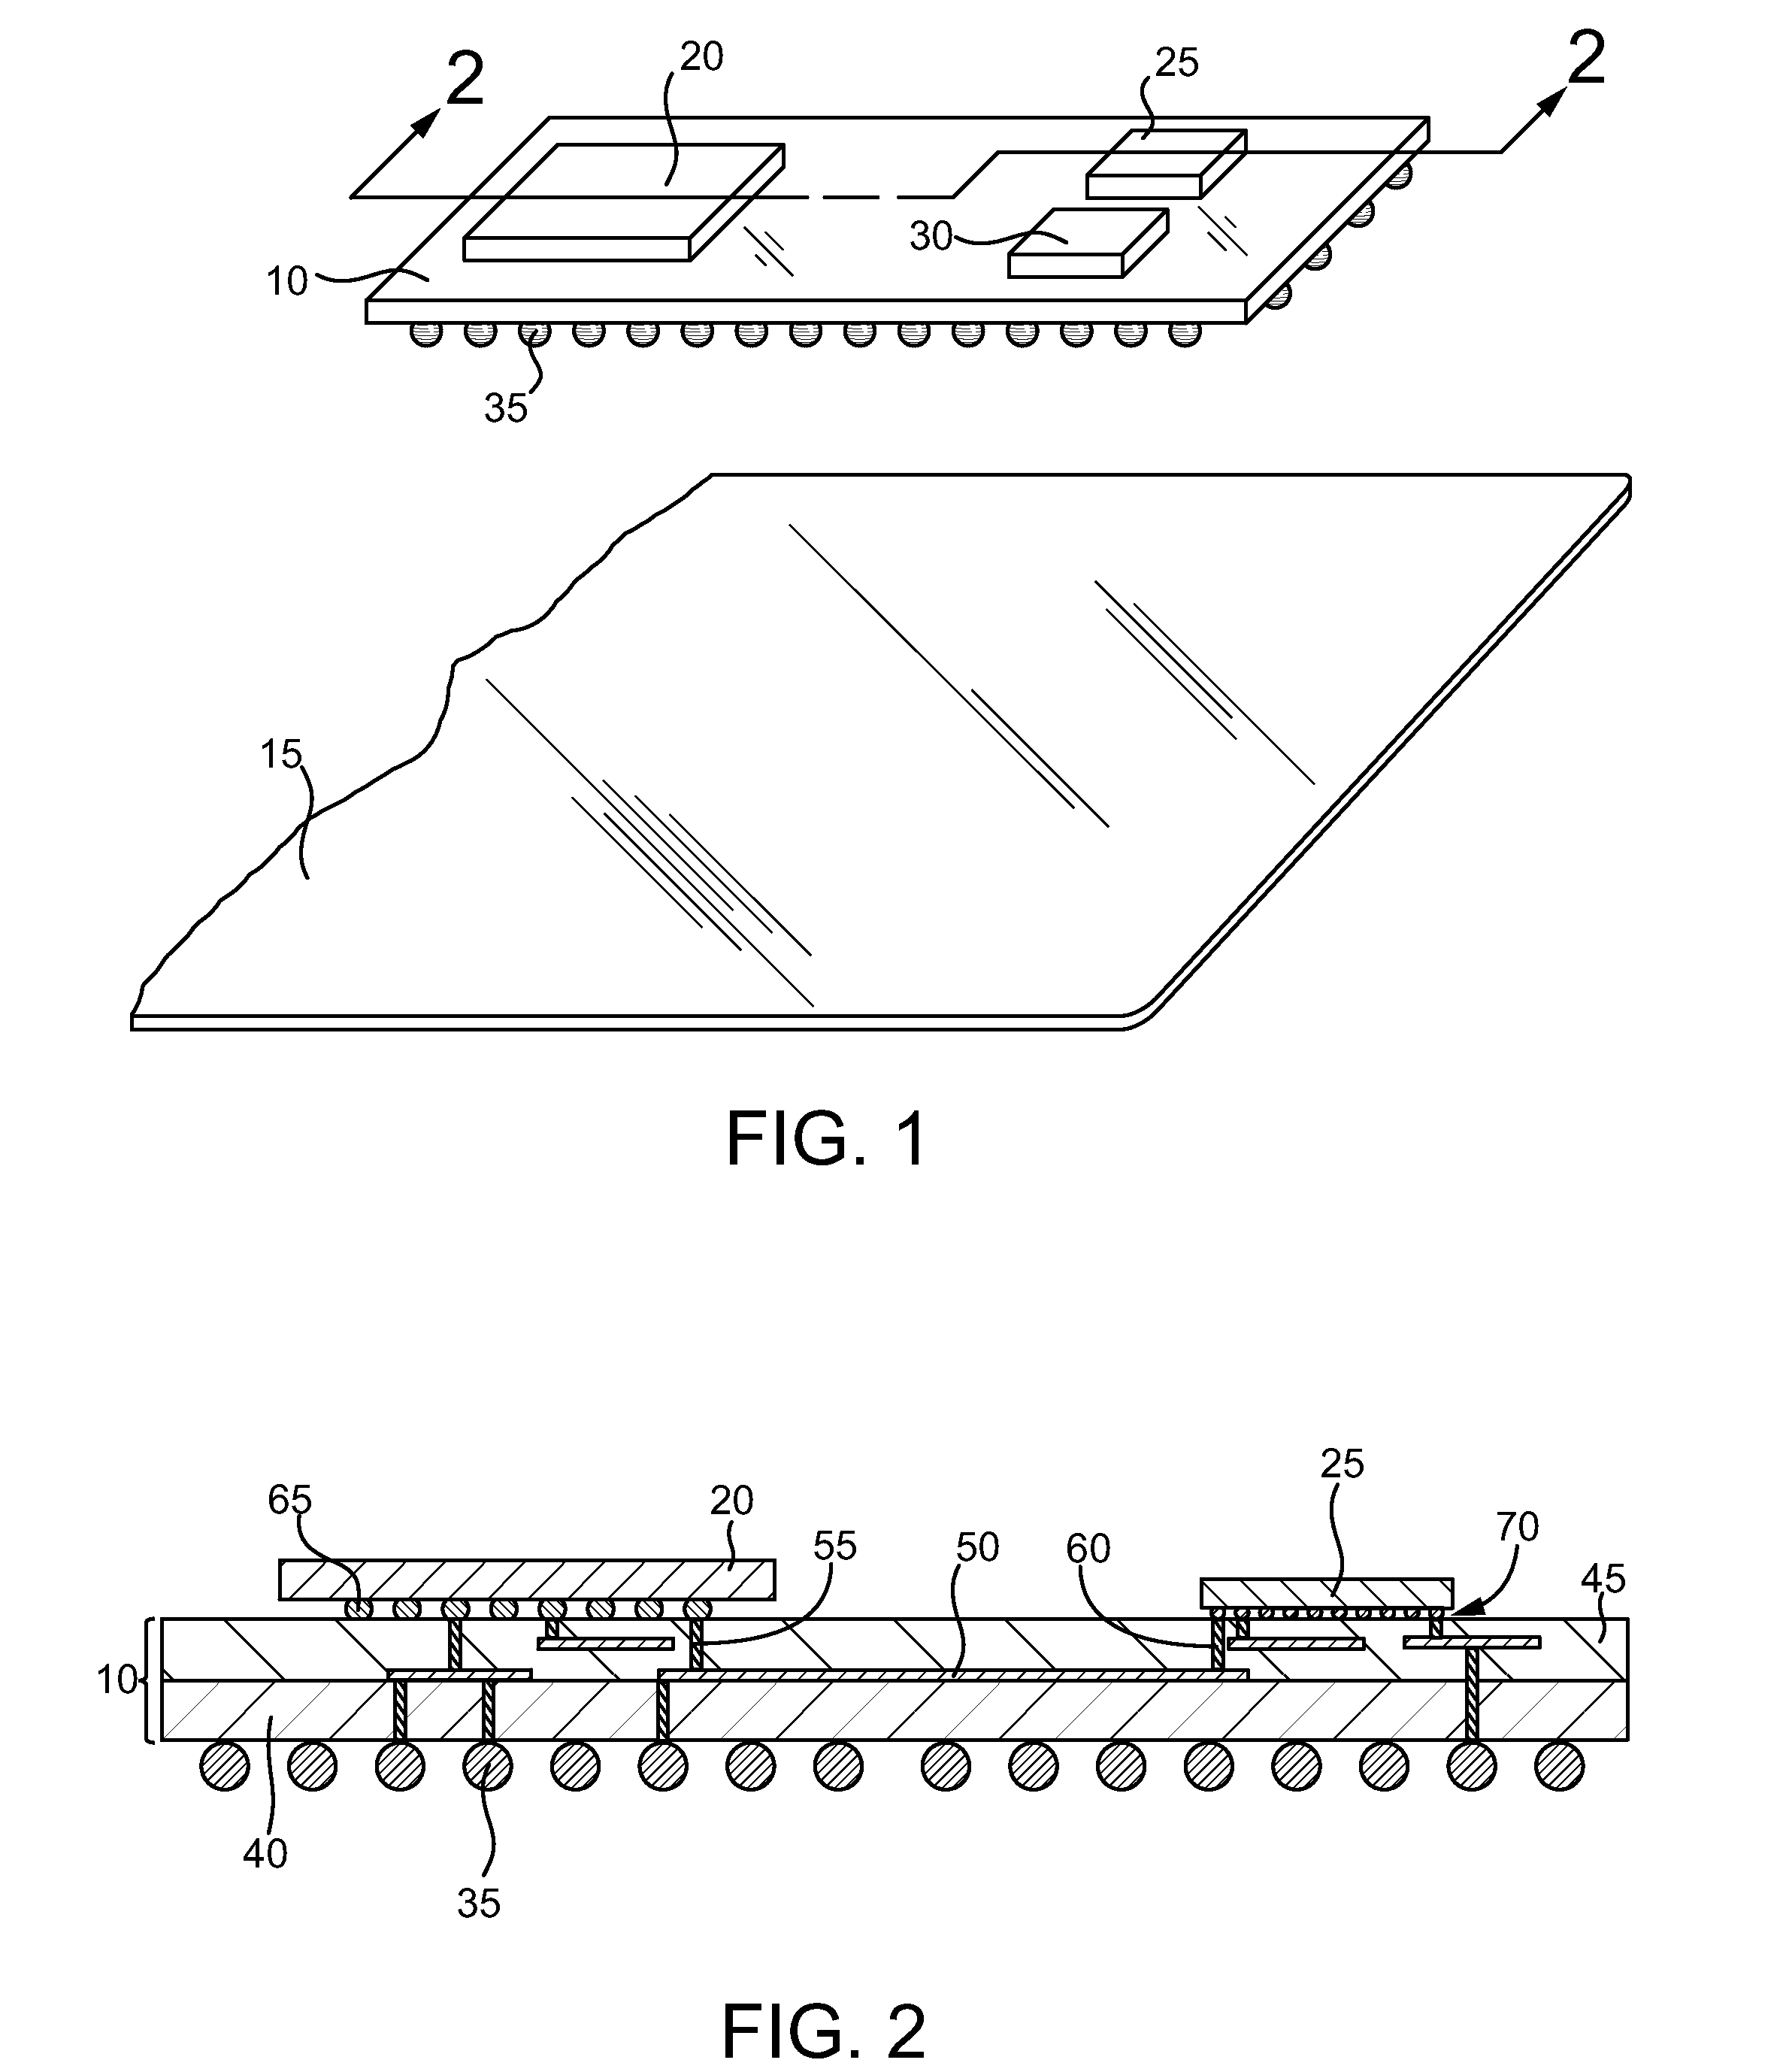 Semiconductor chip with offloaded logic